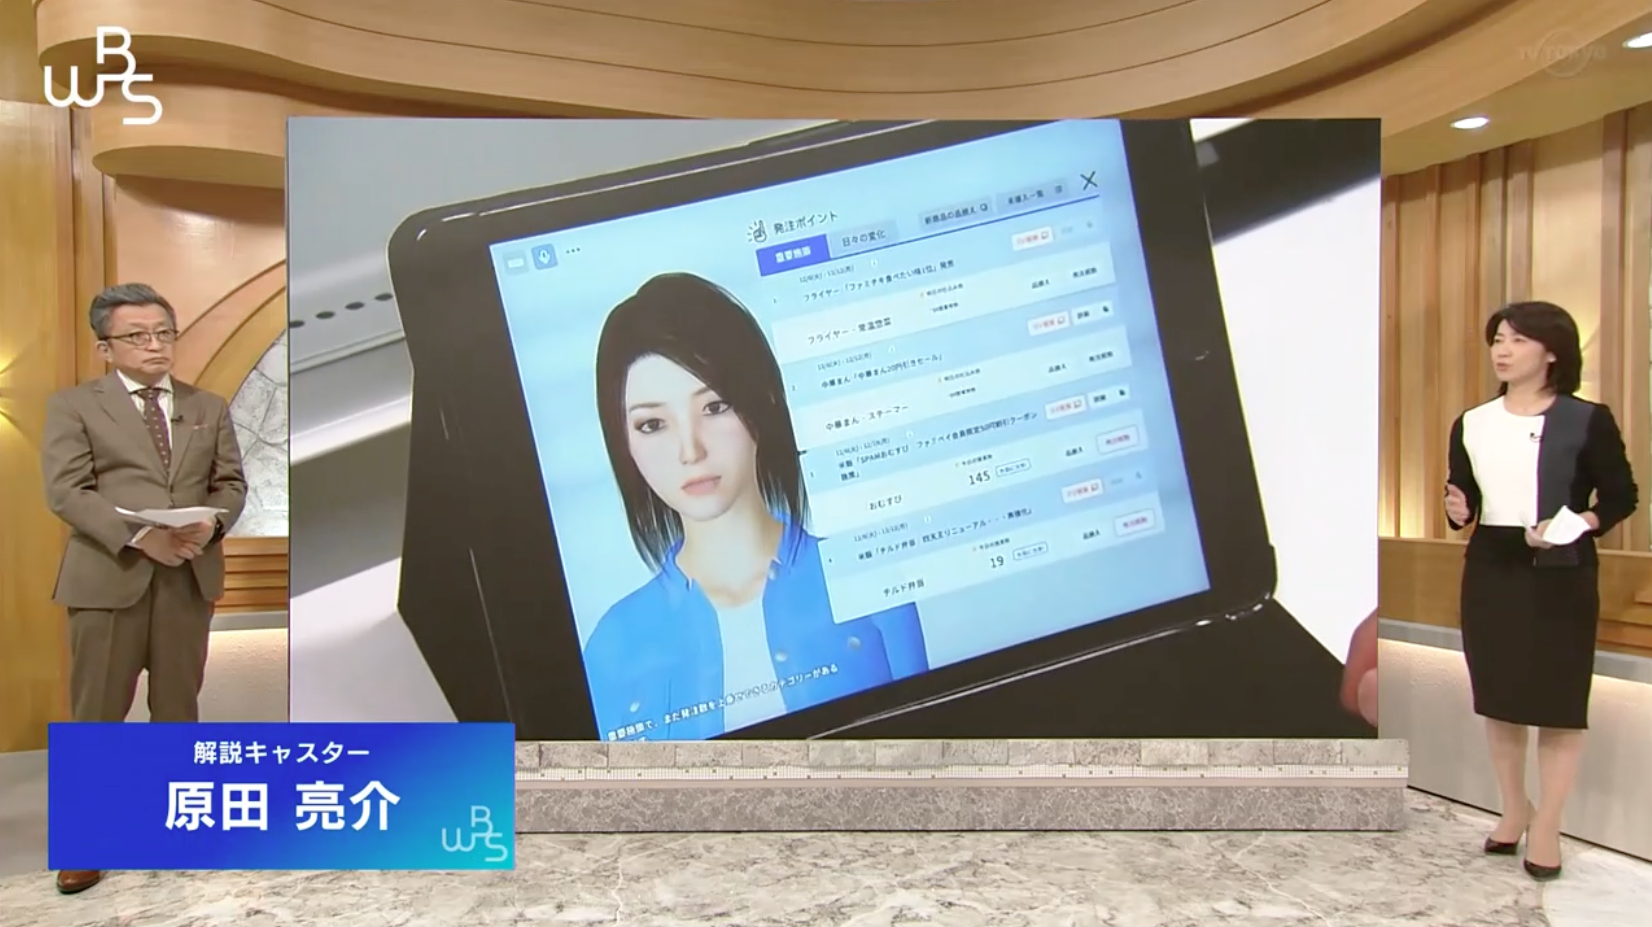 Virtual Human Agent "RACHEL" has been introduced in many TV programs such as "World Business Satellite" and "N-STA"